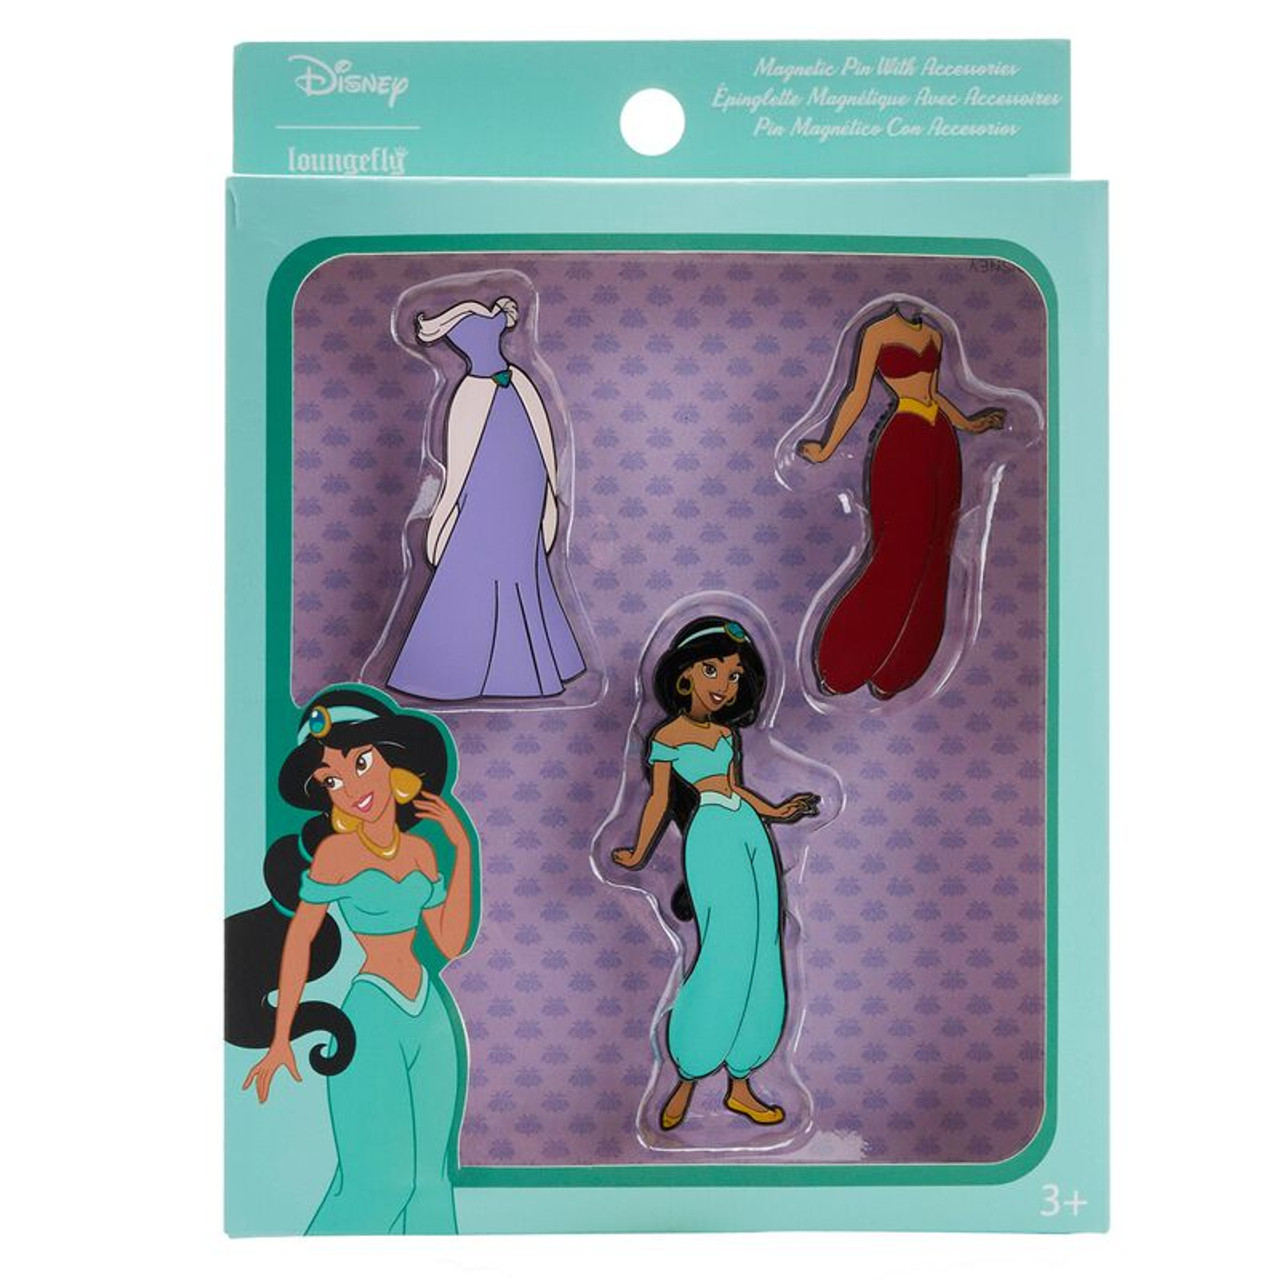 Disney Princess Beauty & the Beast Magnetic Paper Dolls Collectors Series